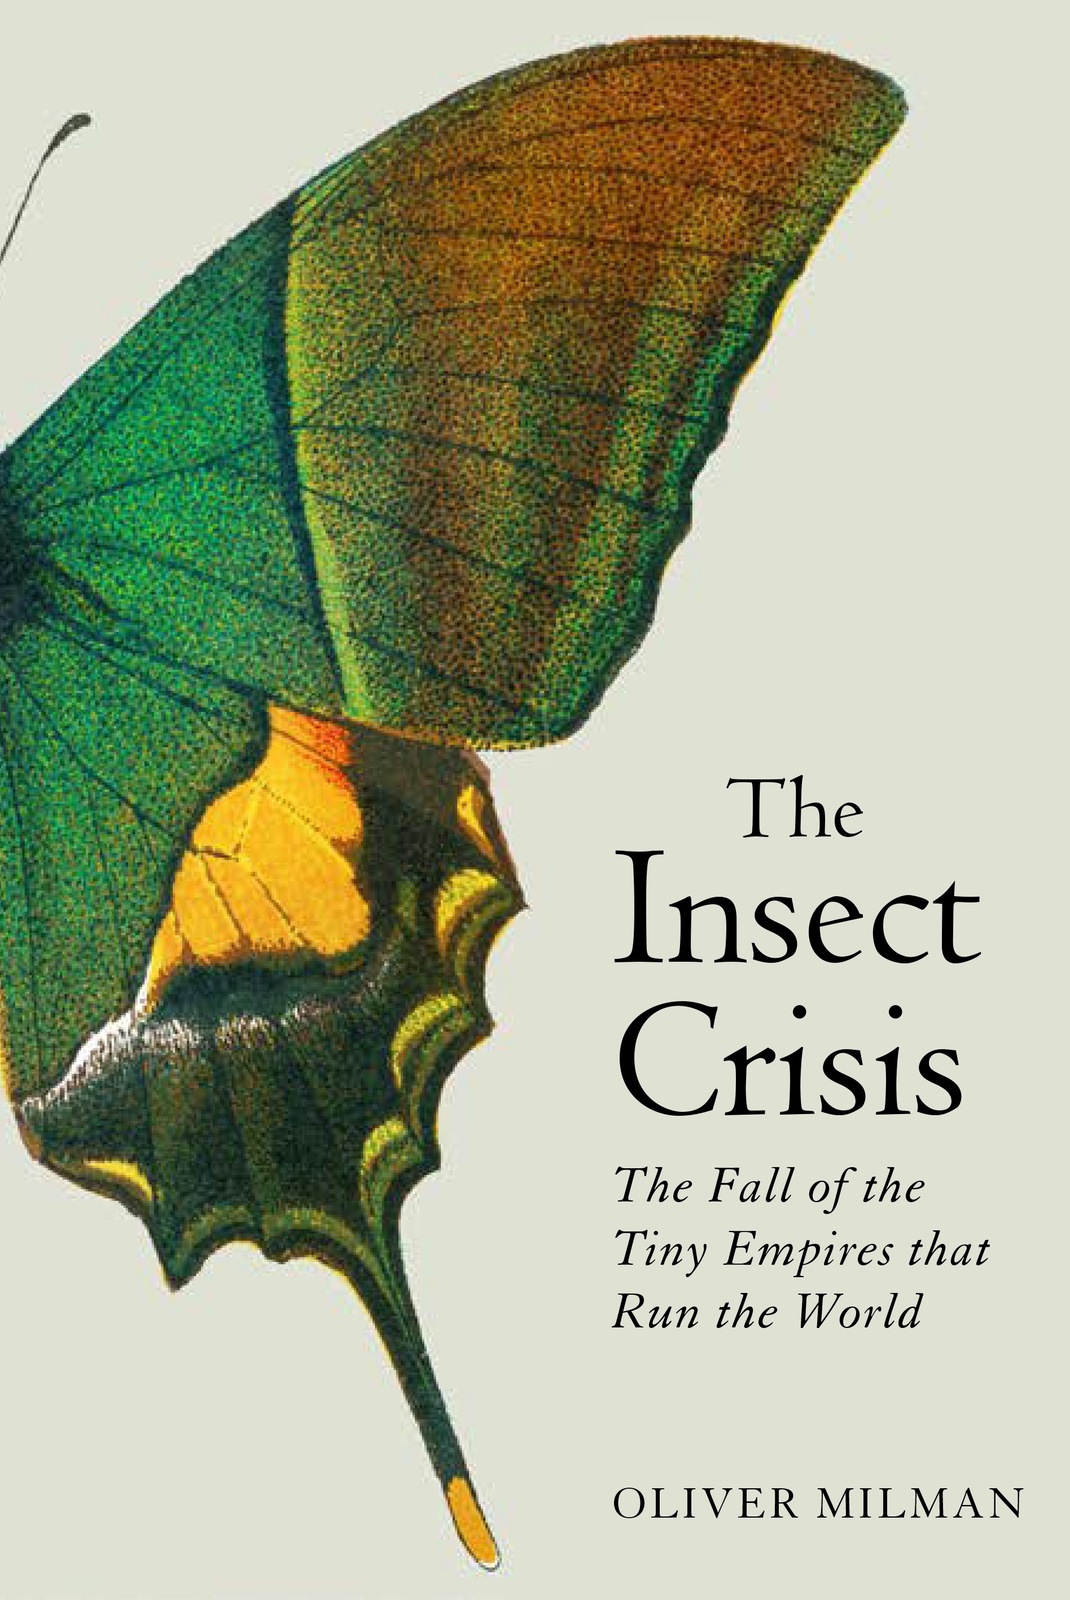 the insect crisis by oliver milman